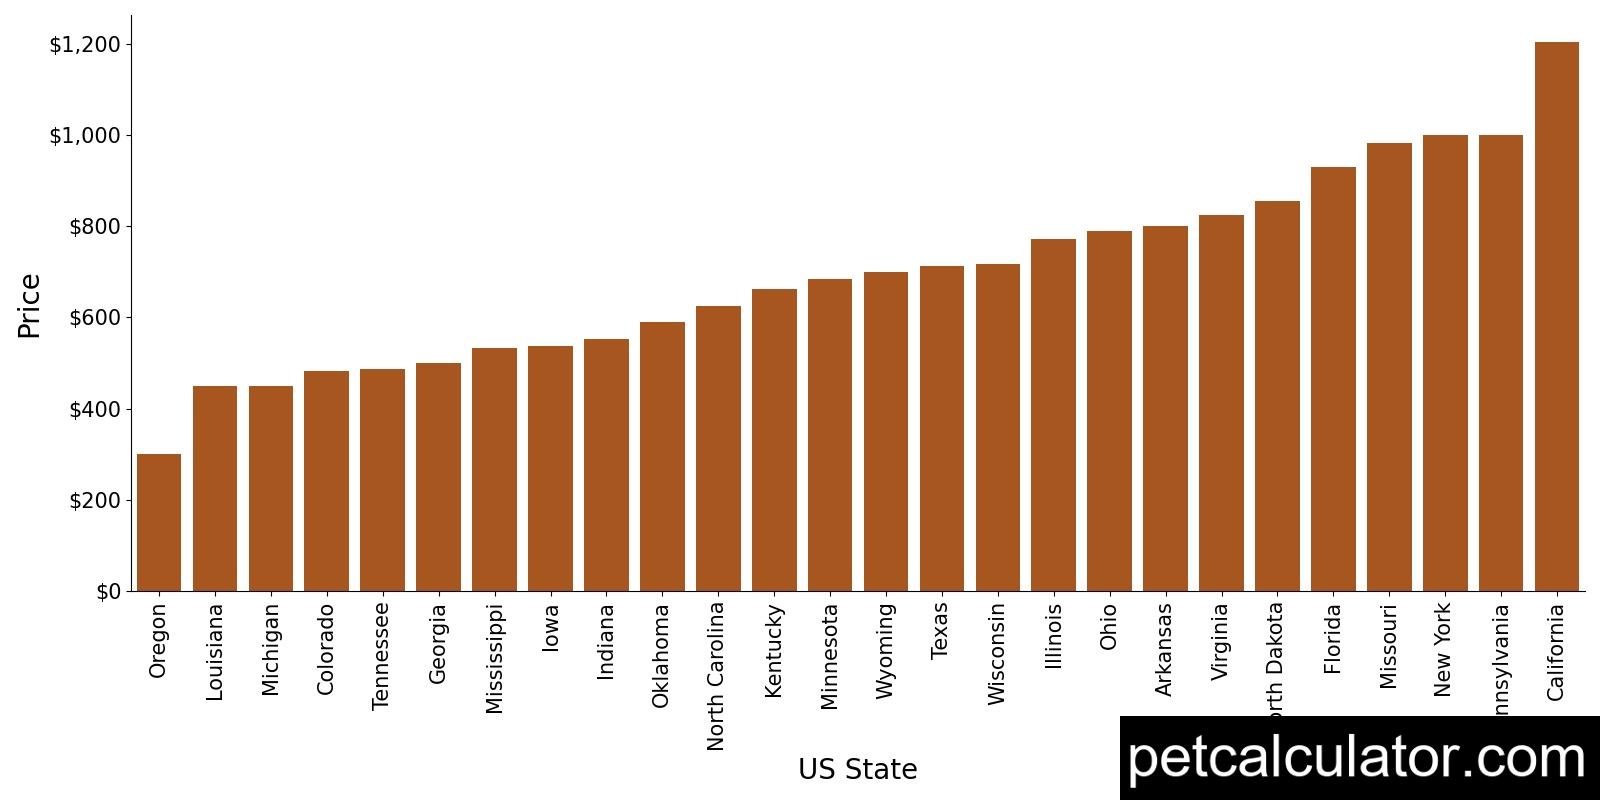 Price of Rat Terrier by US State 